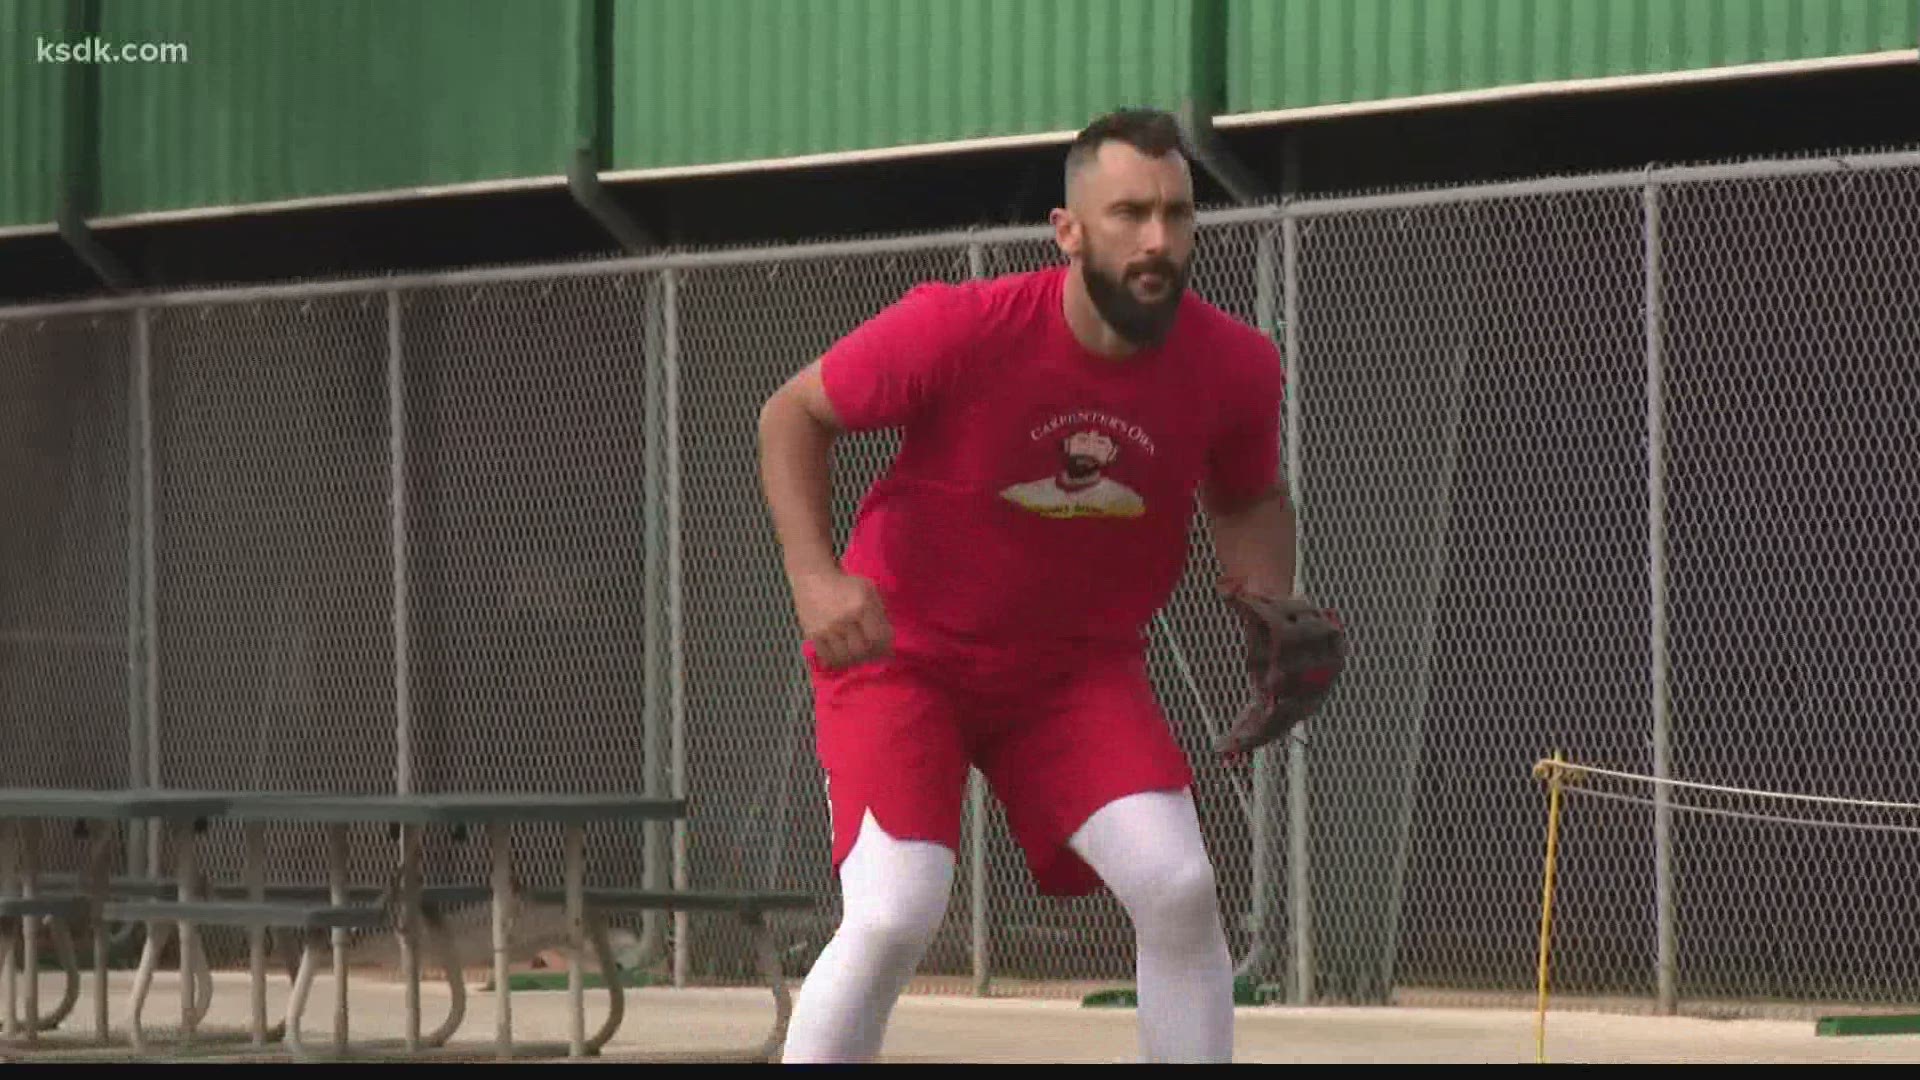 The Cardinals veteran is ready for the return of baseball.